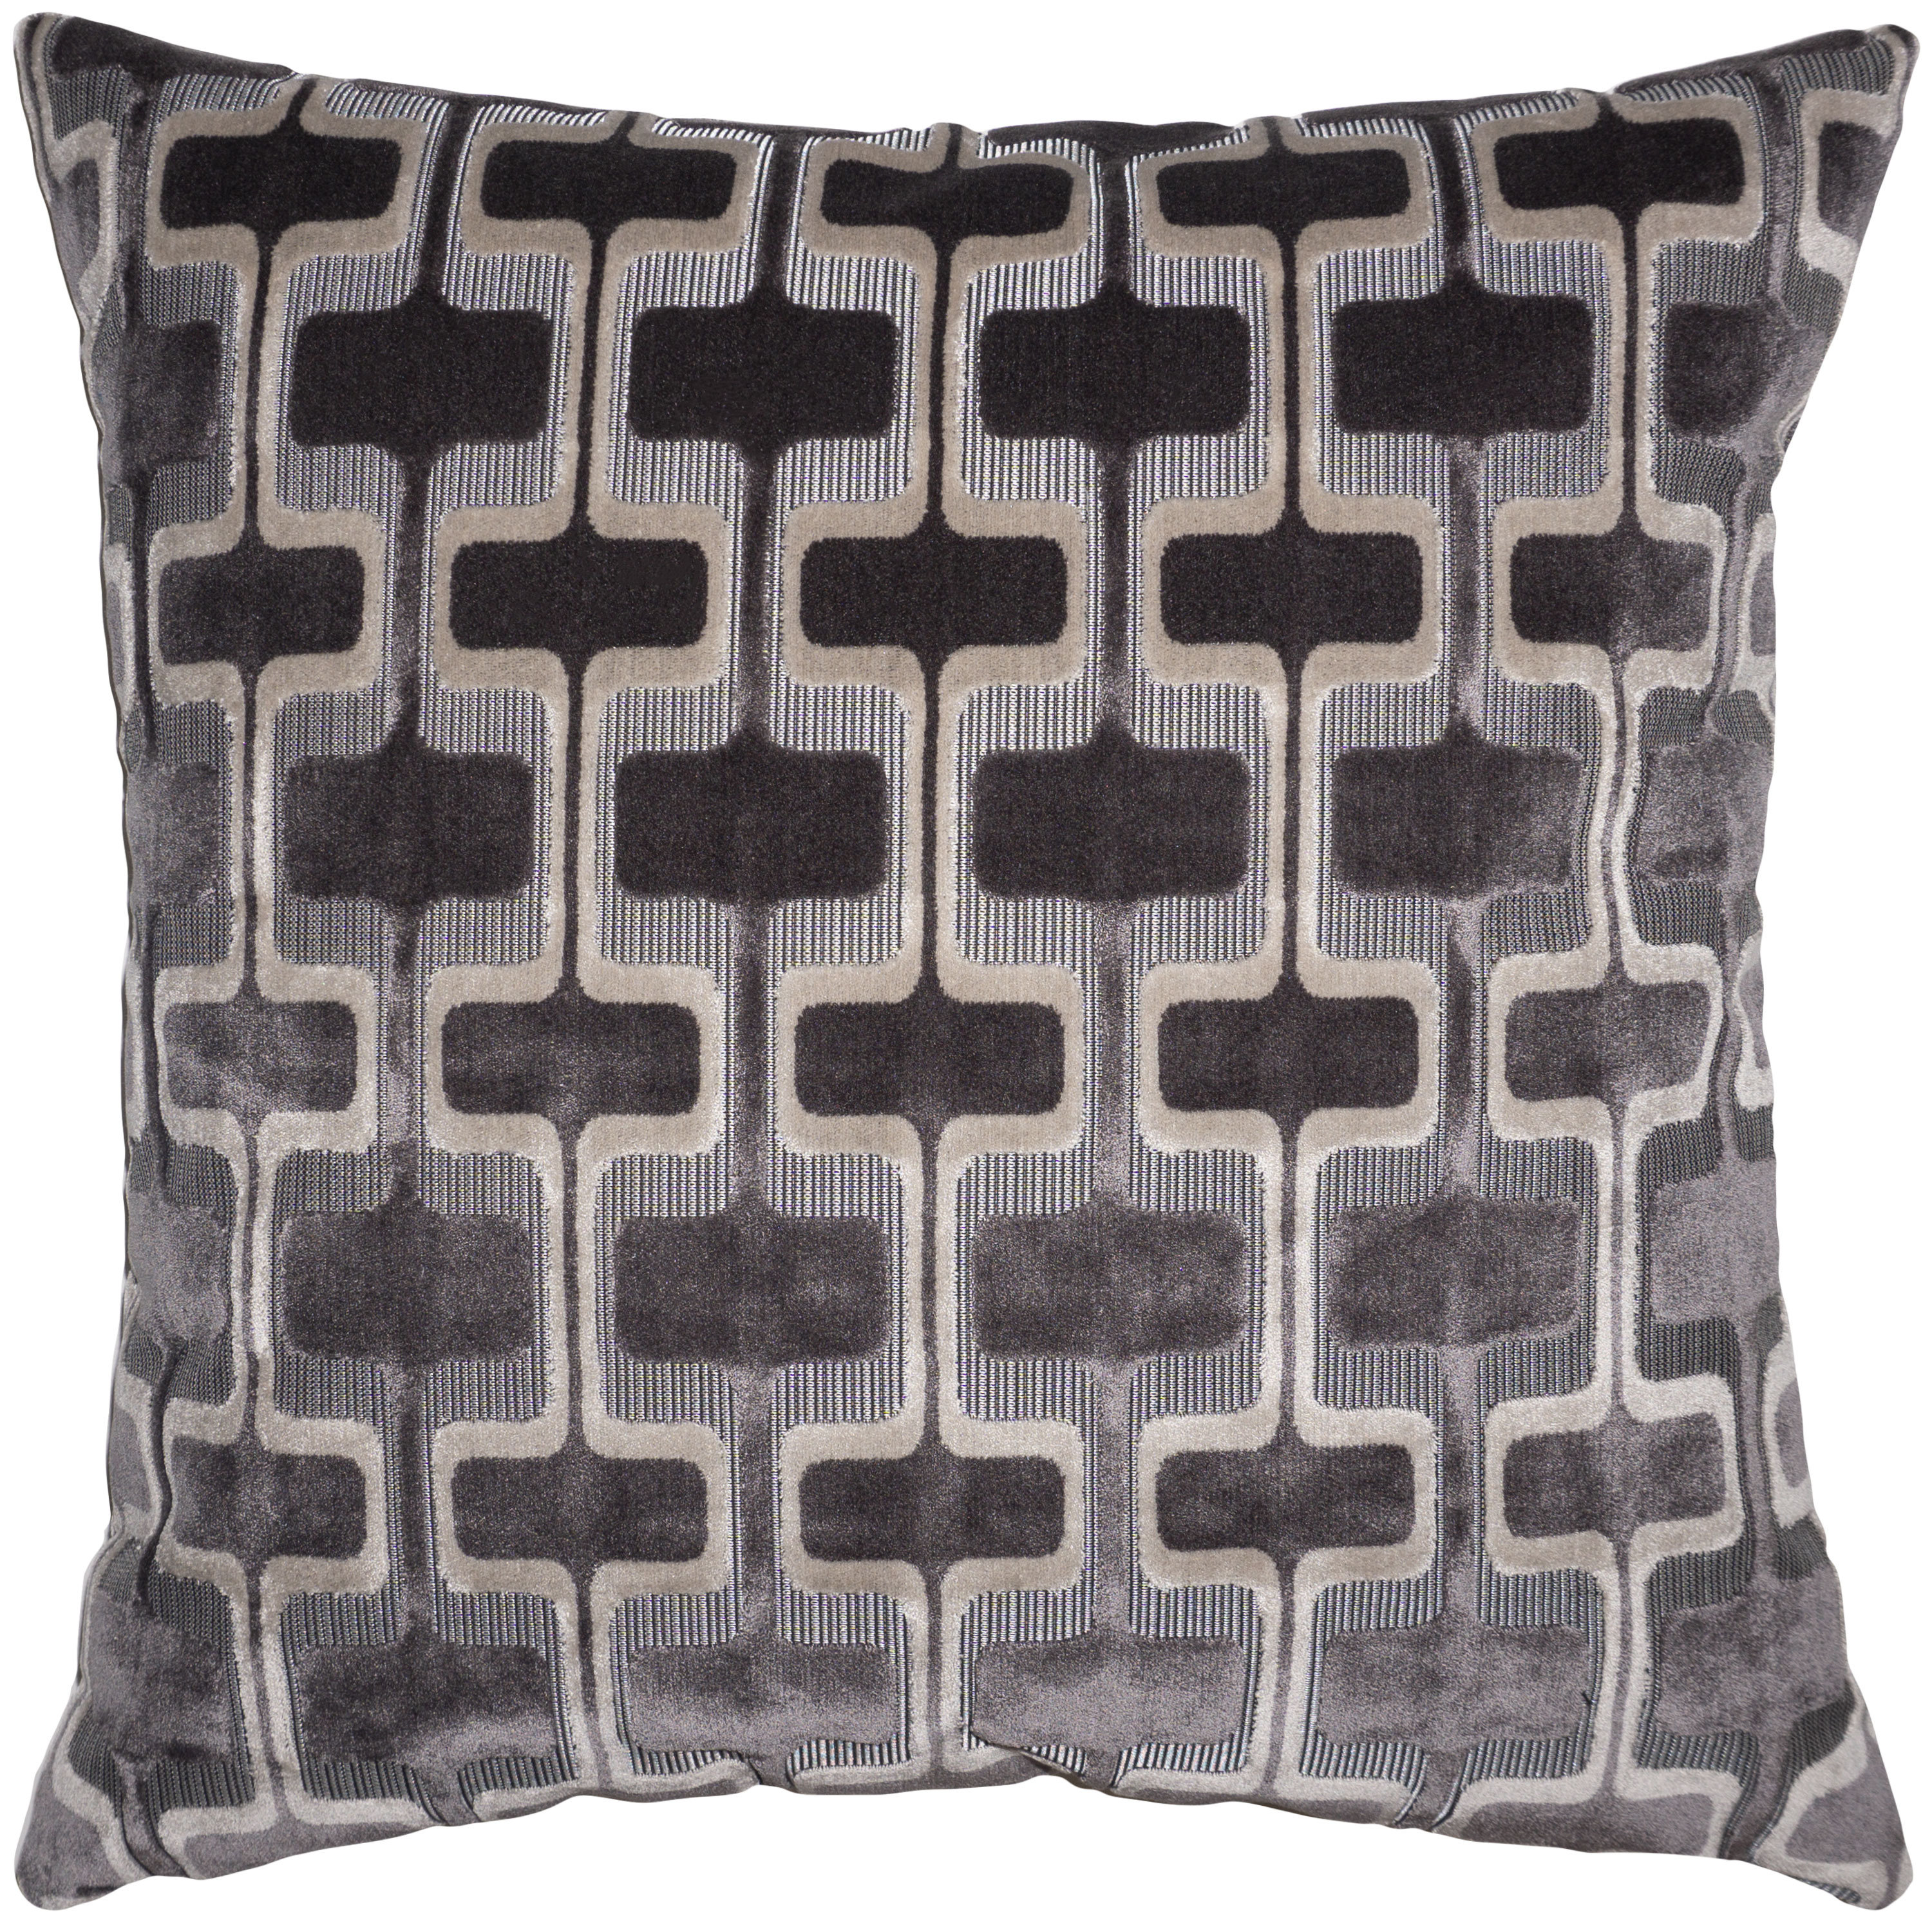 20 Beige & Gray Geometric Square Throw Pillow - Feather & Down Filler